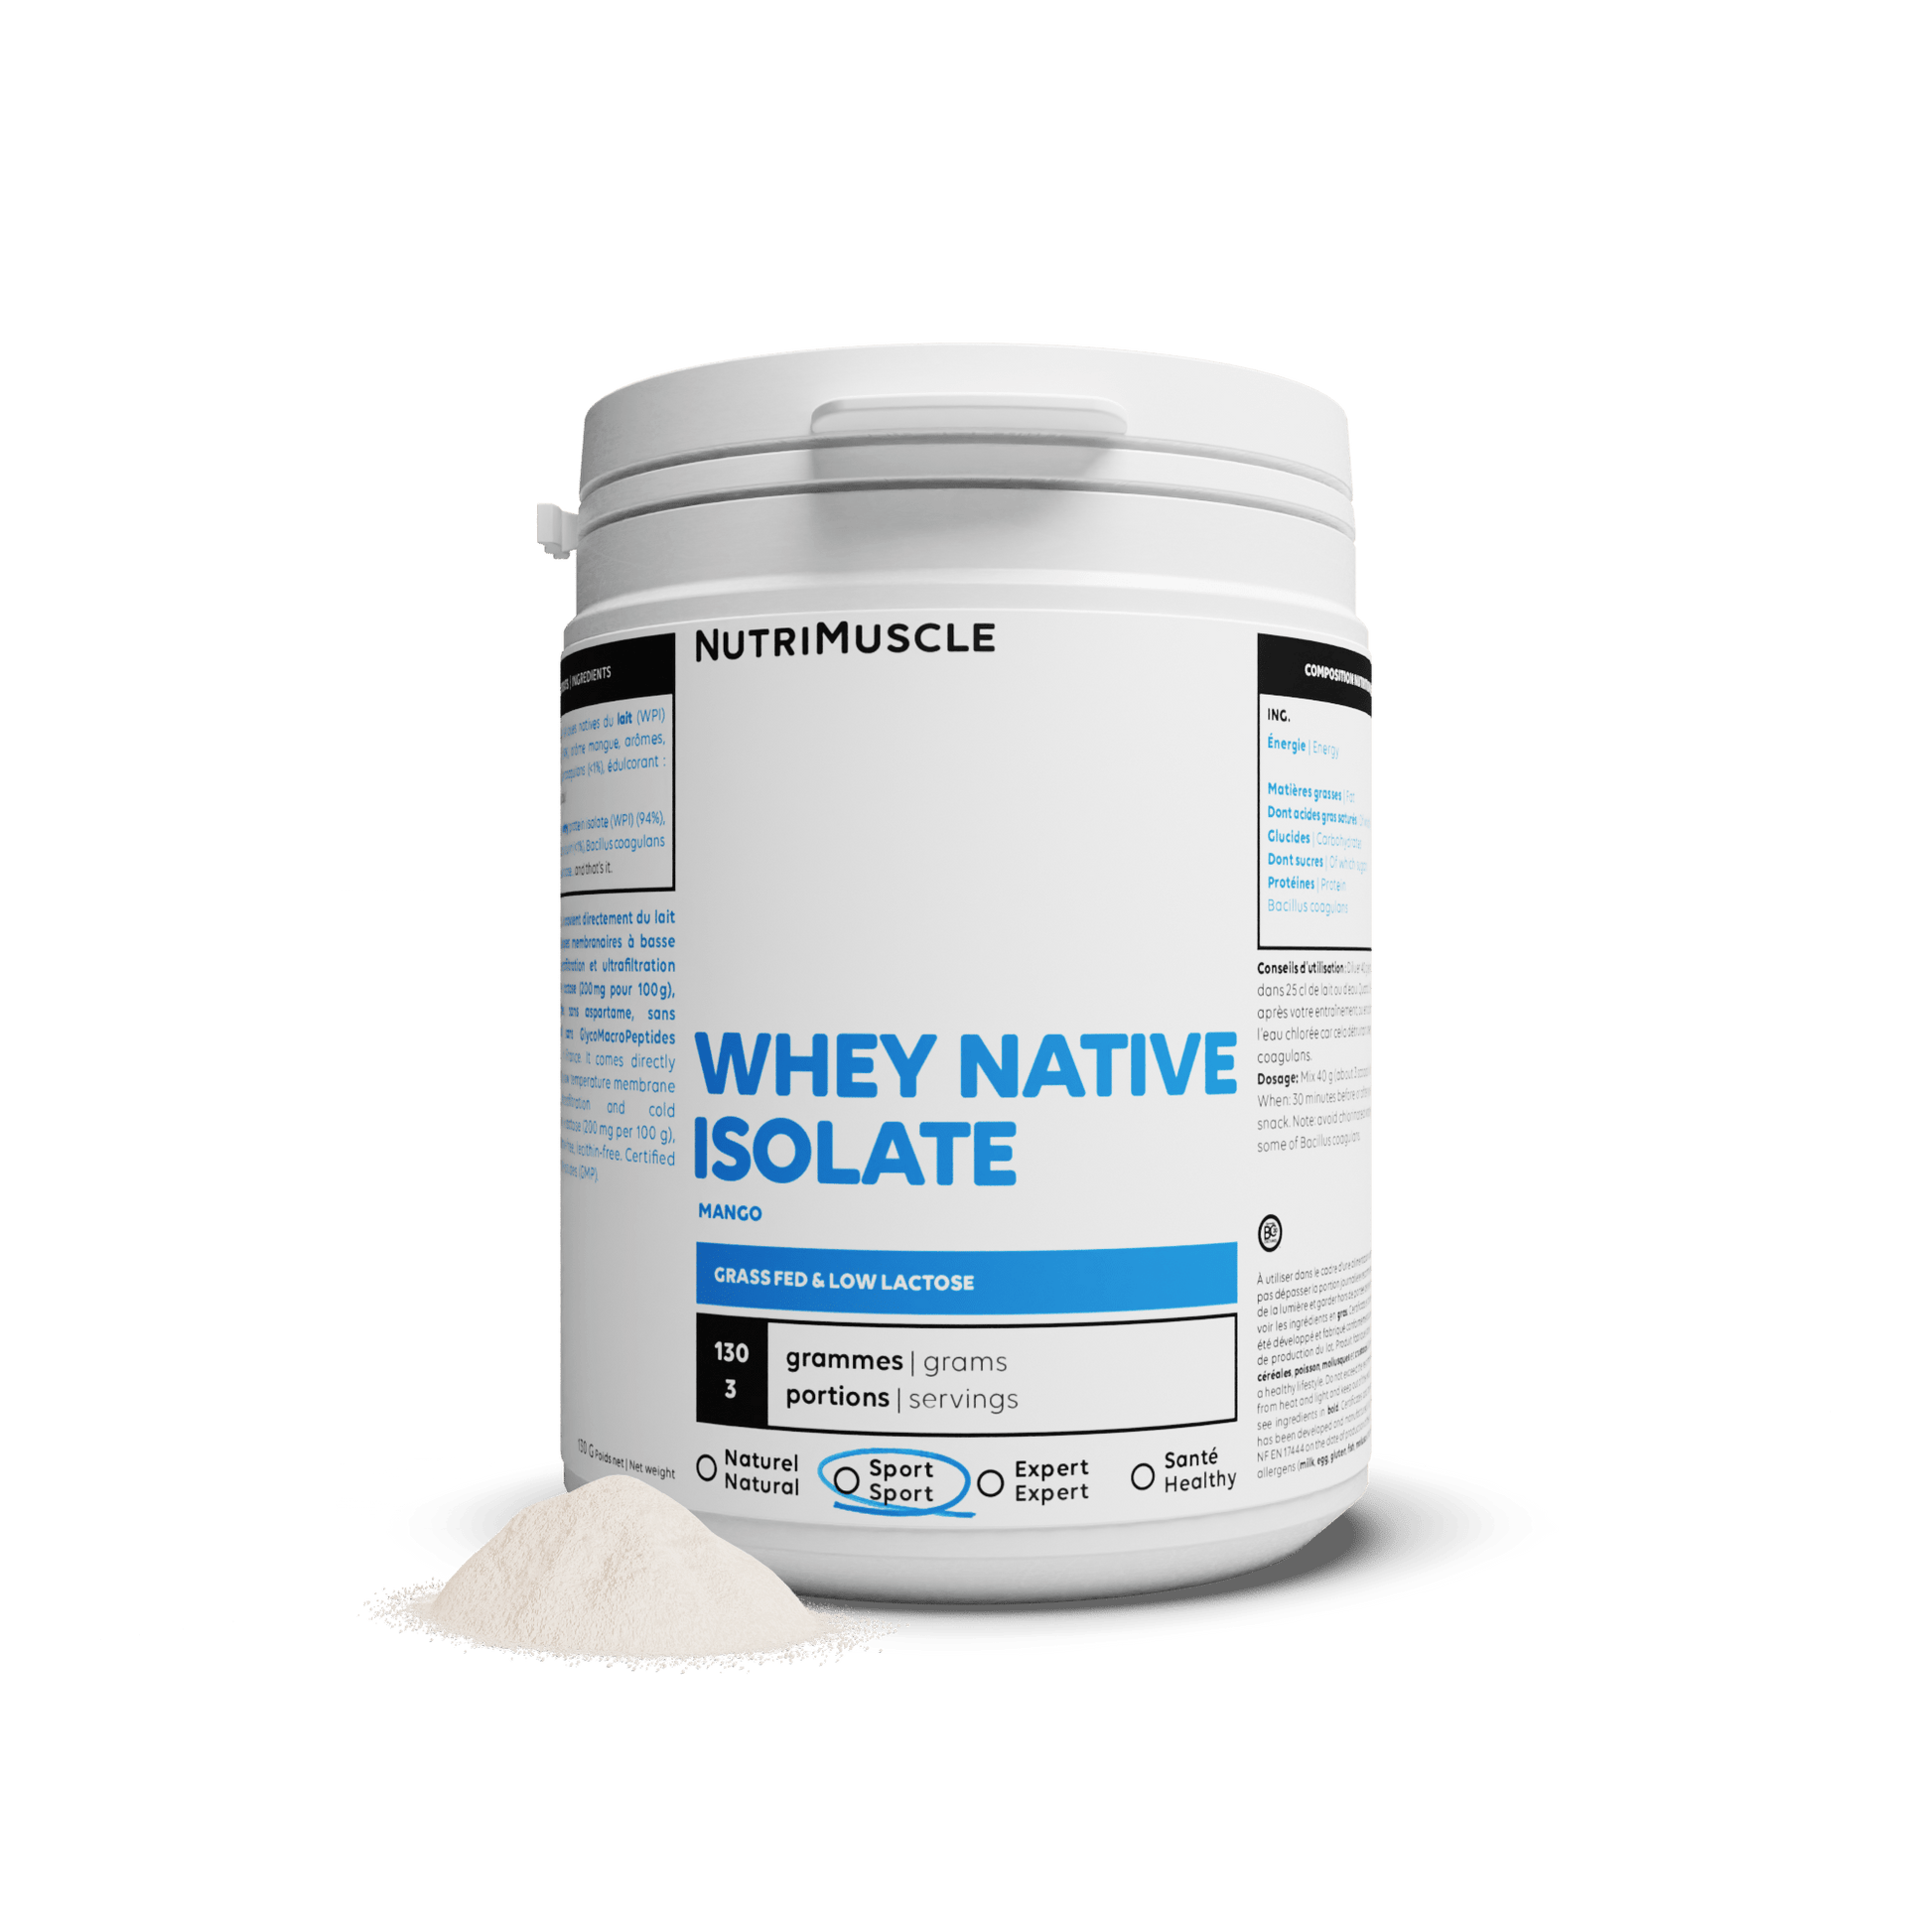 Nutrimuscle Protéines Mangue / 130 g Whey Native Isolate (Low lactose)